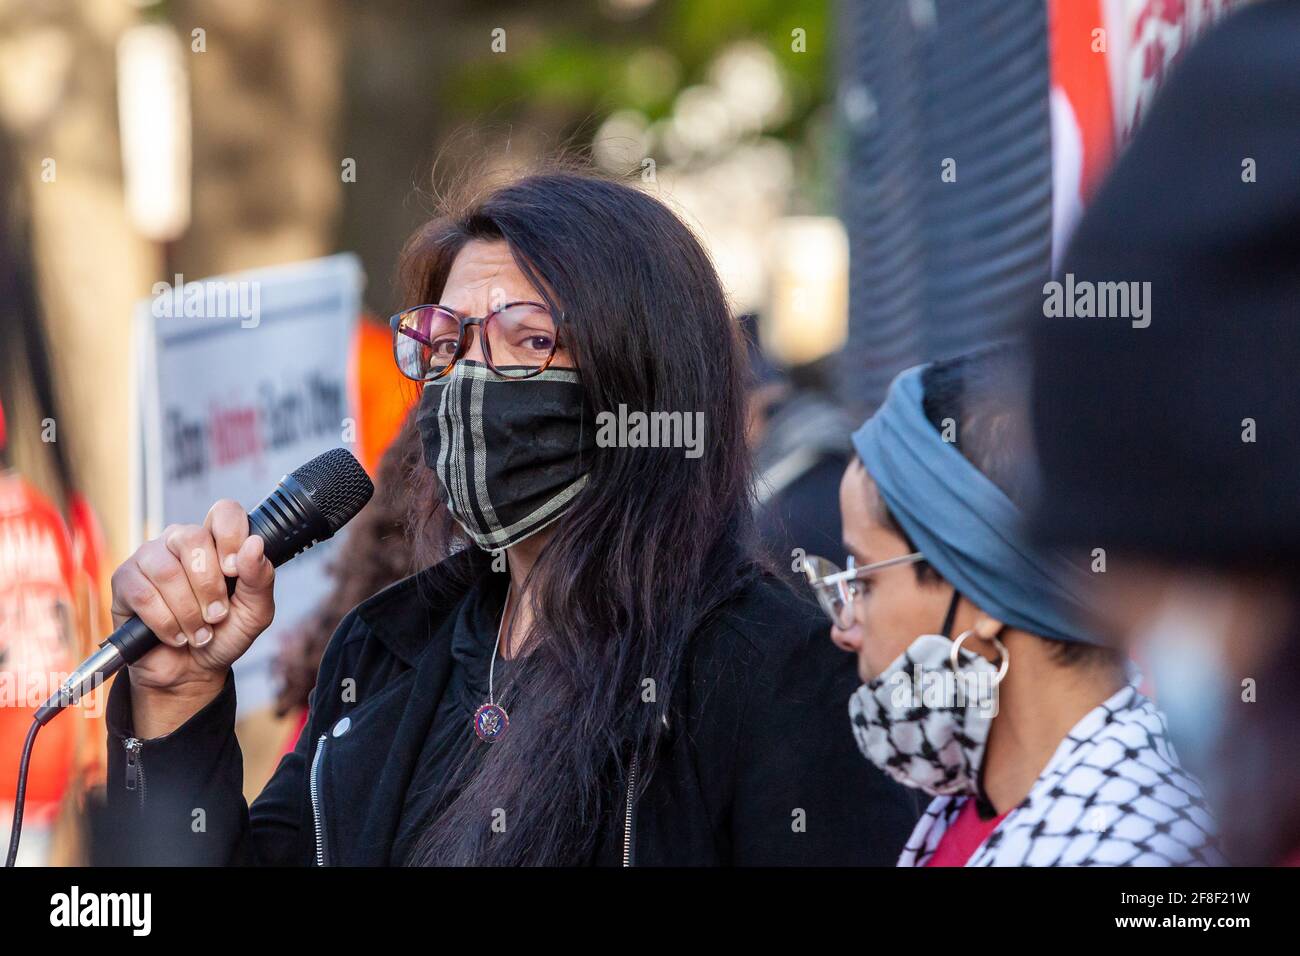 Washington, USA. 13th Apr, 2021. Representative Rashida Tlaib speaks at a vigil in memory of the victims of the war in Yemen, and in support of a 17-day hunger strike by two women (one pictured) asking President Biden to end the fuel blockade. Credit: Allison Bailey/Alamy Live News Stock Photo